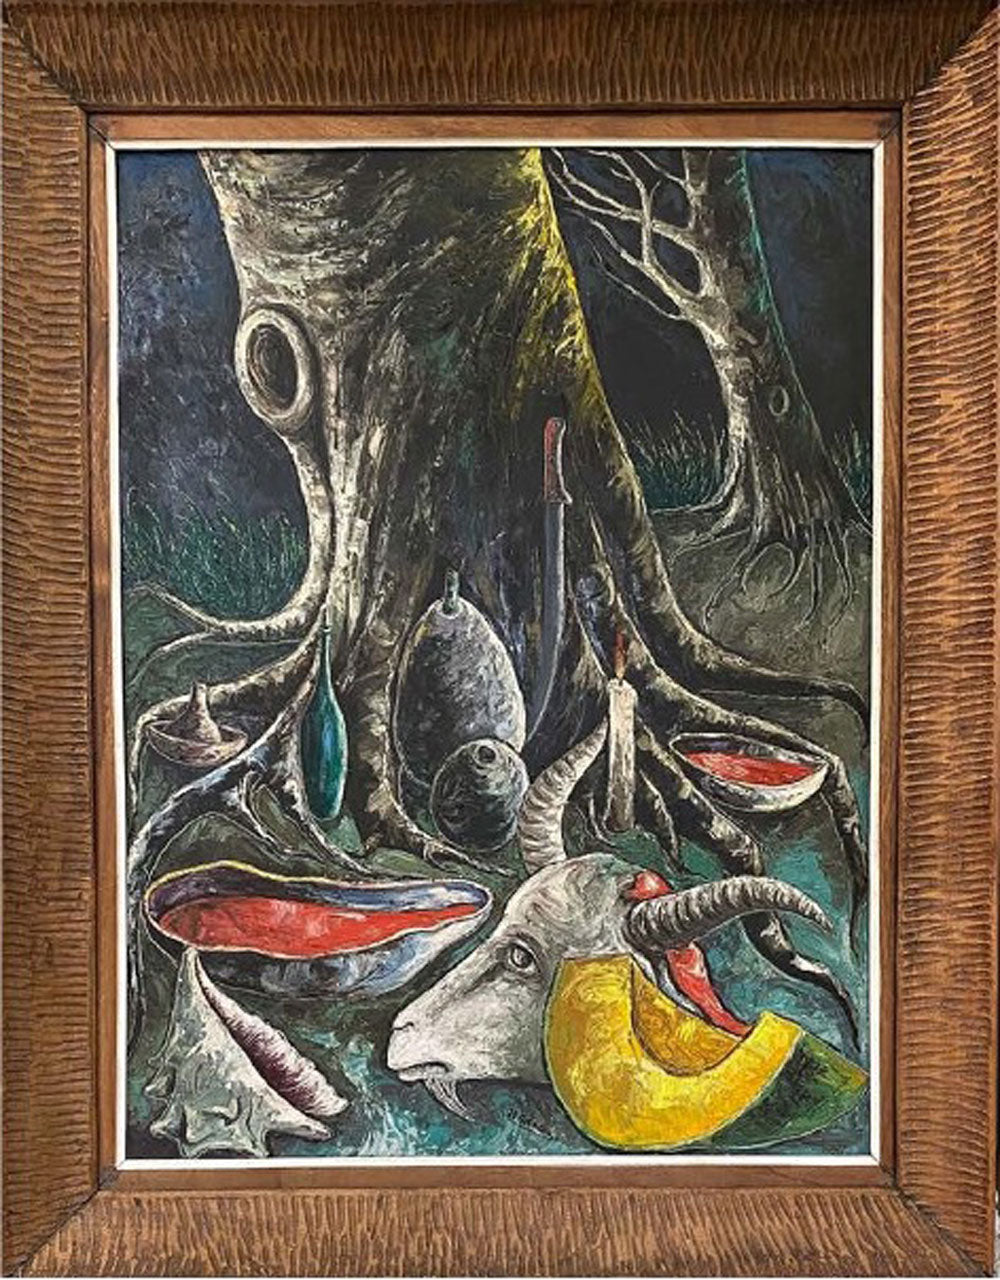 Jacques-Enguerrand Gourgue (1930-1996) 32"x24" Goat Head Beneath Tree 1960-1970 Oil on Board Painting #9-SM